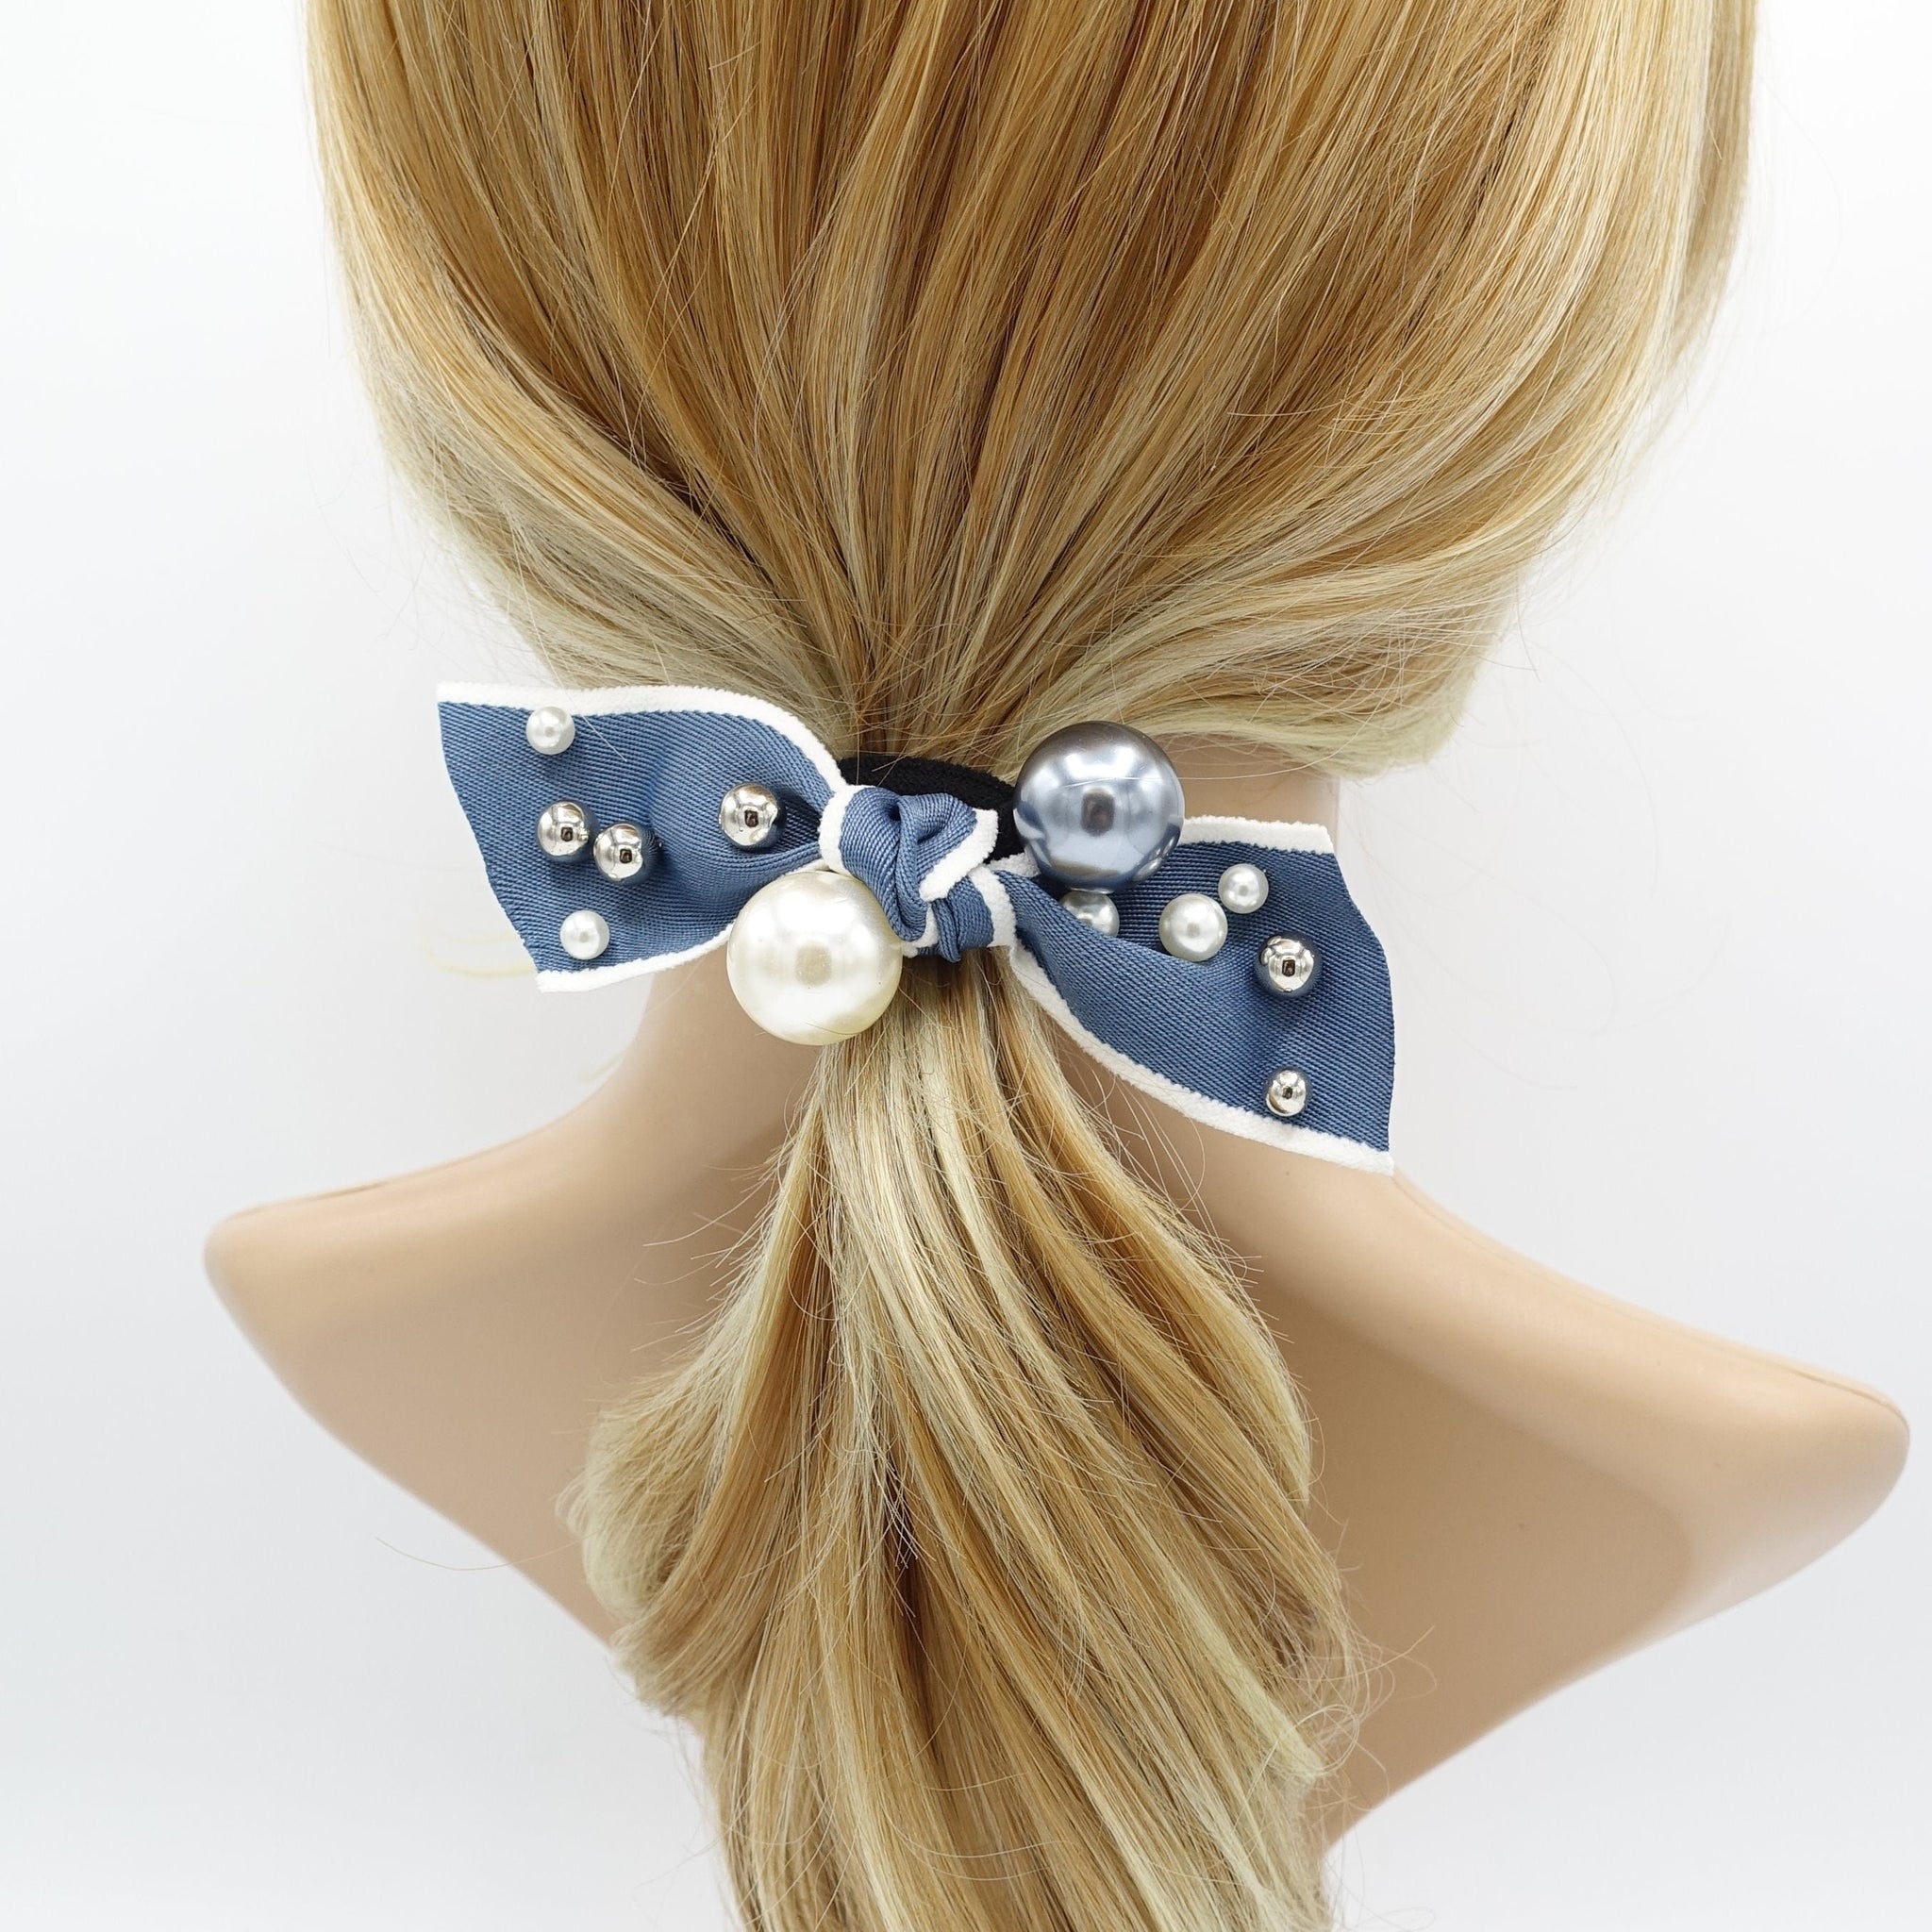 veryshine.com Ponytail holders Blue a set of pearl decorated bow knot ponytail holders hair elastic